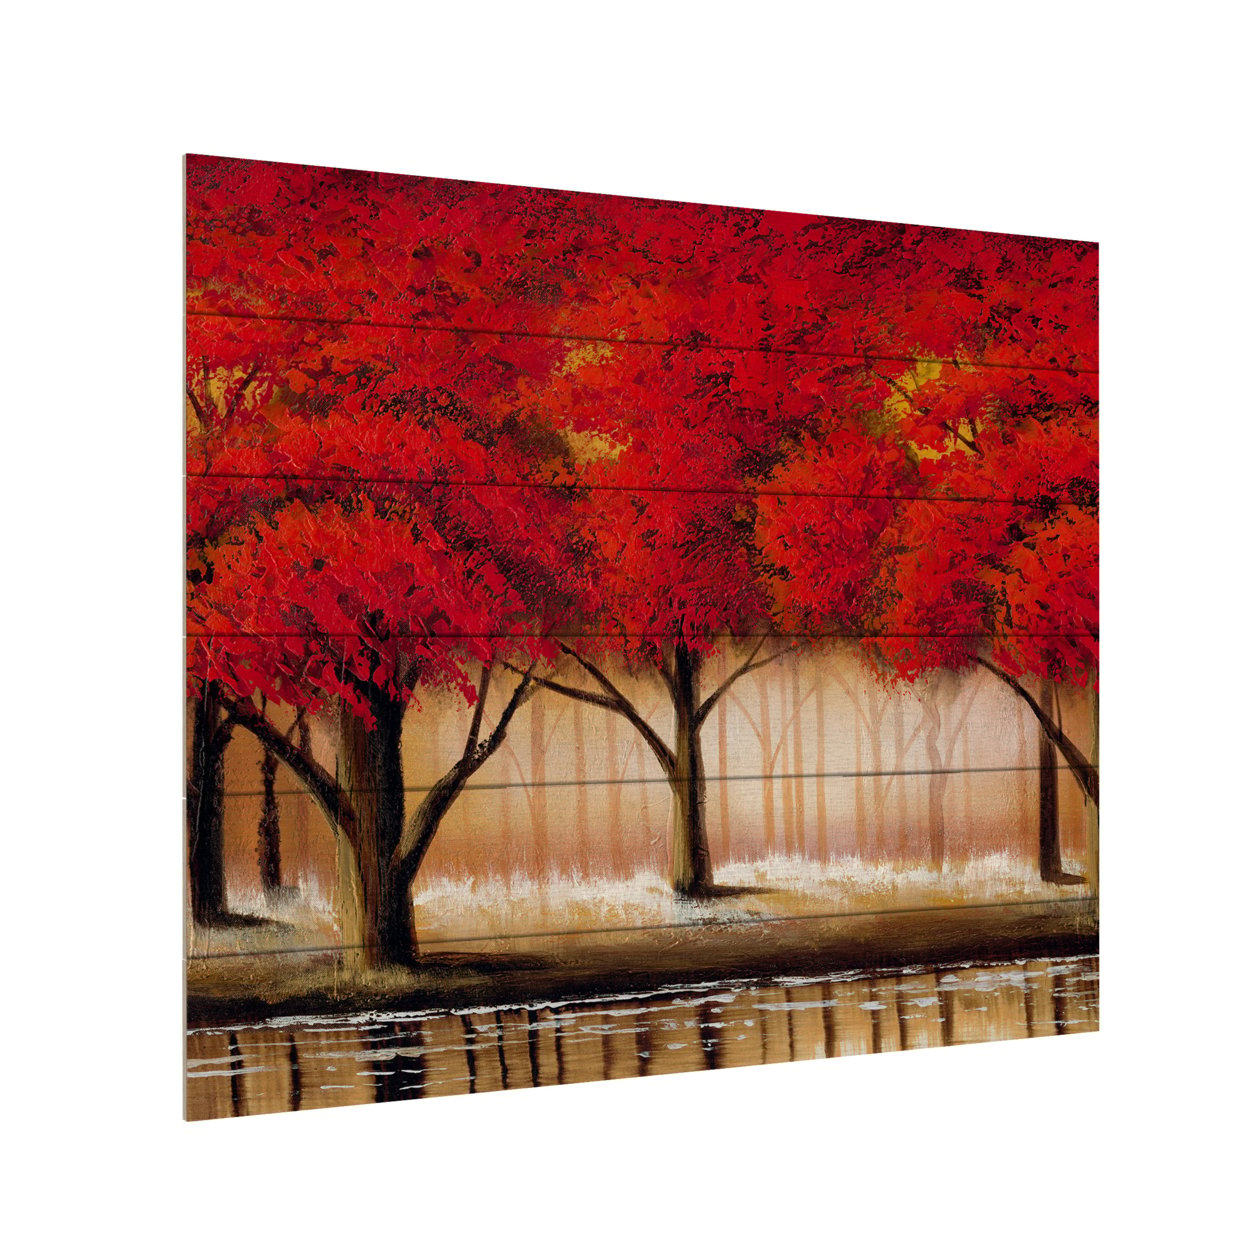 Wooden Slat Art 18 X 22 Inches Titled Parade Of Red Trees II Ready To Hang Home Decor Picture